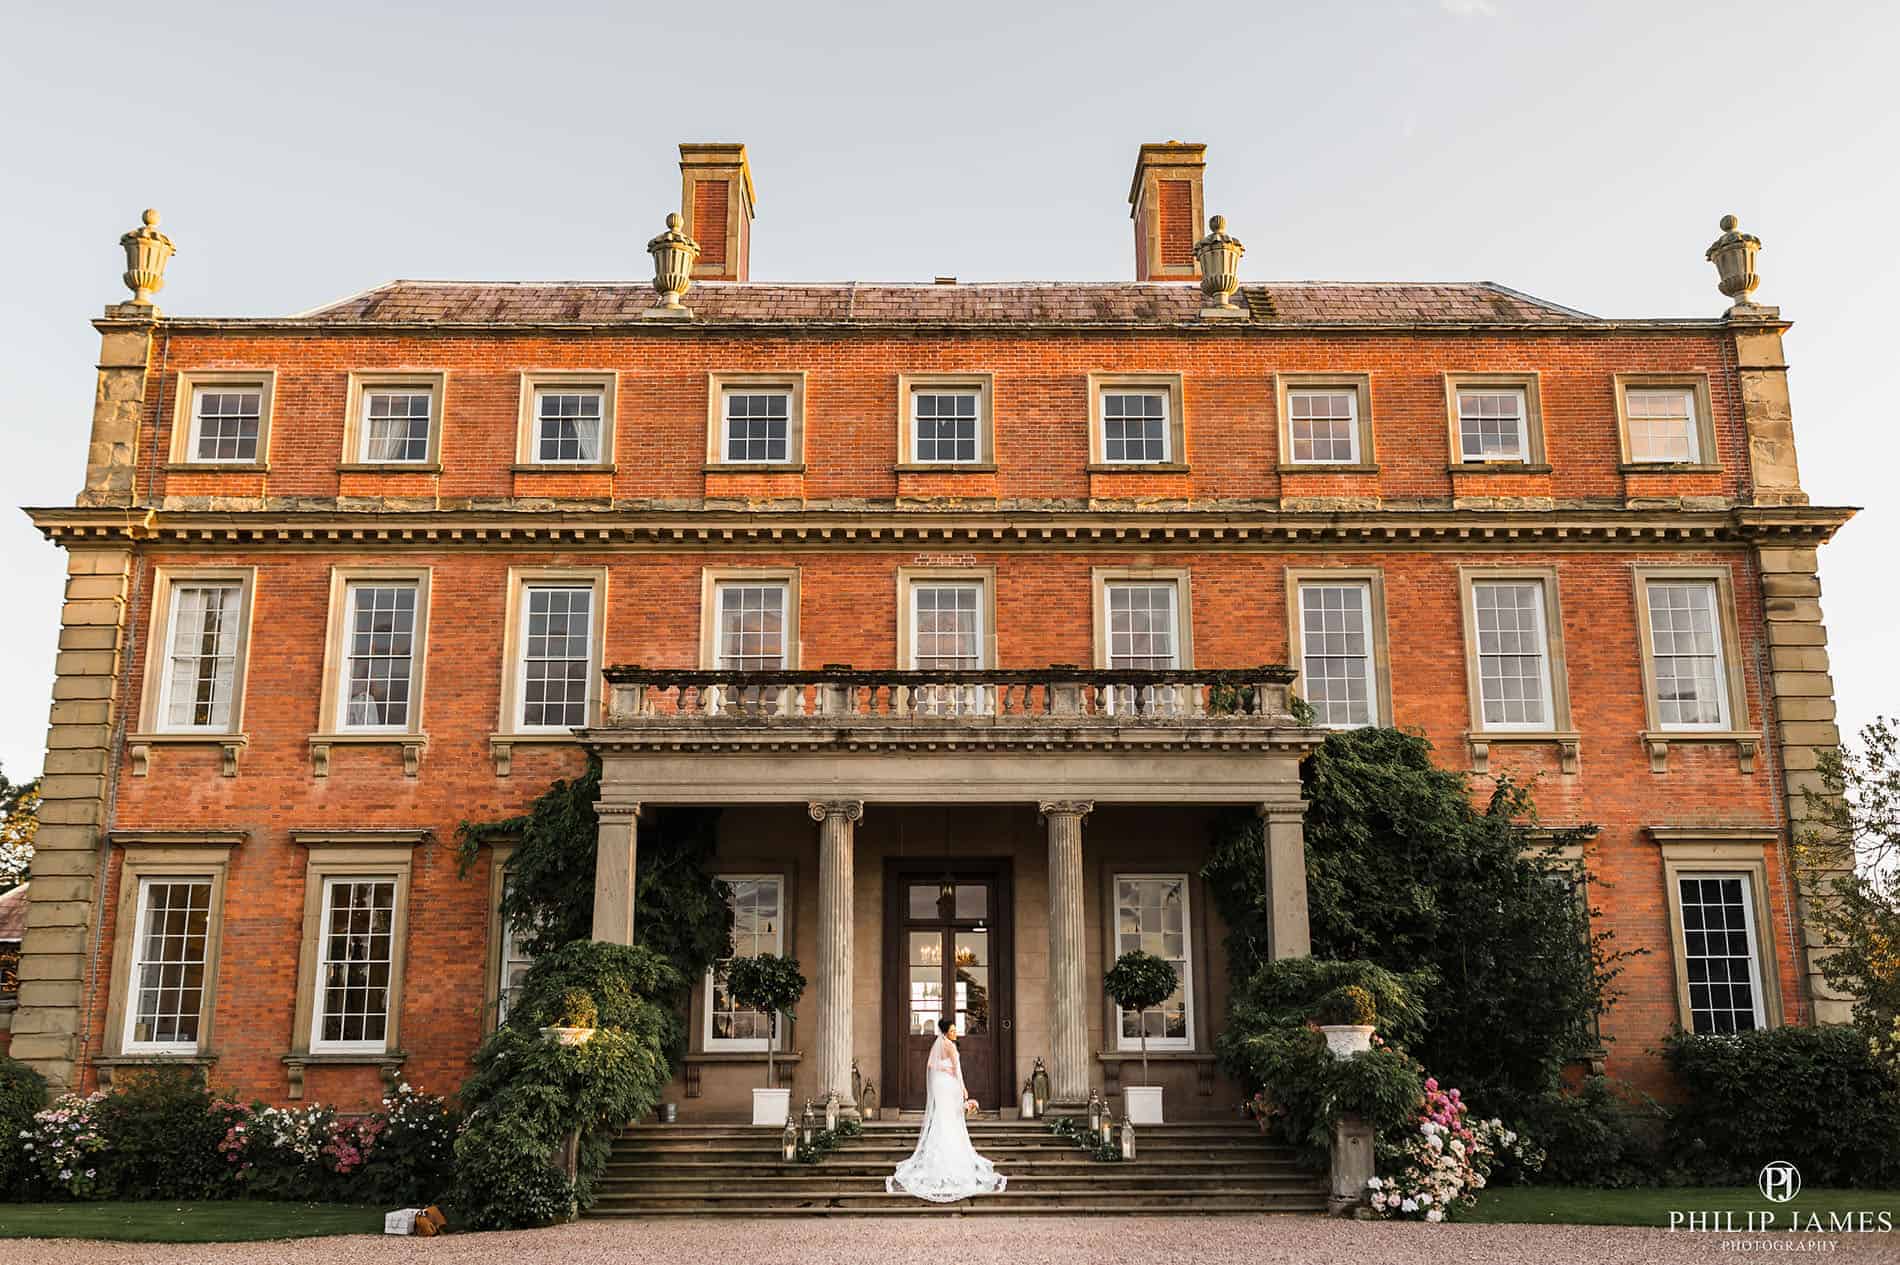 Things to consider when choosing your Wedding Venue – From a Photographers perspective!